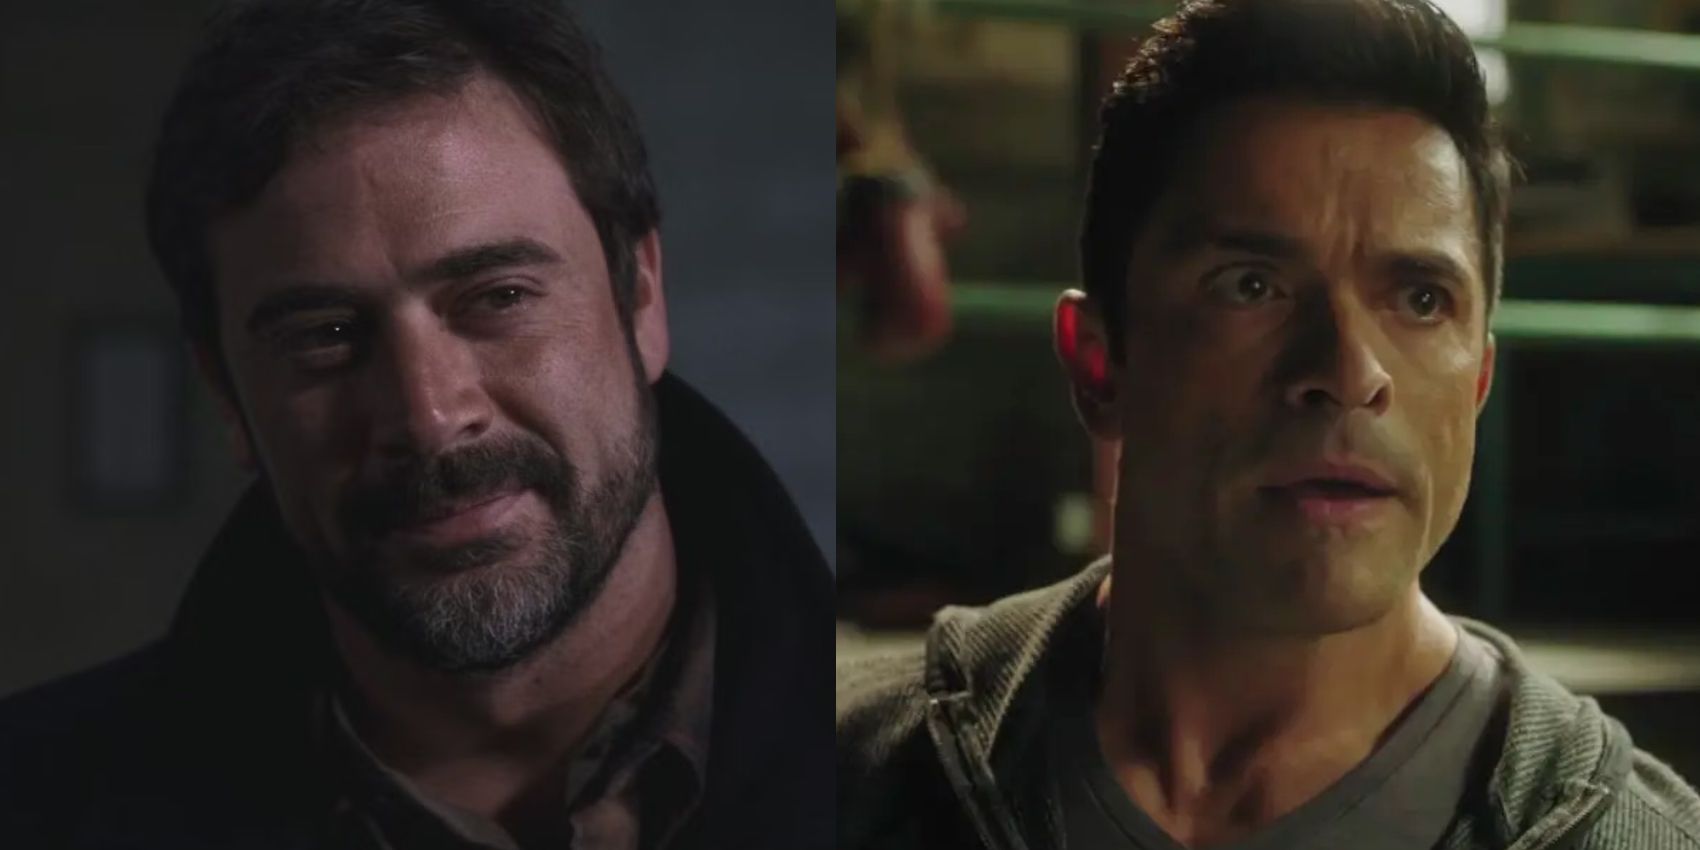 Side by side image: Jeffrey Dean Morgan as John Winchester in Supernatural; and Mark Consuelos